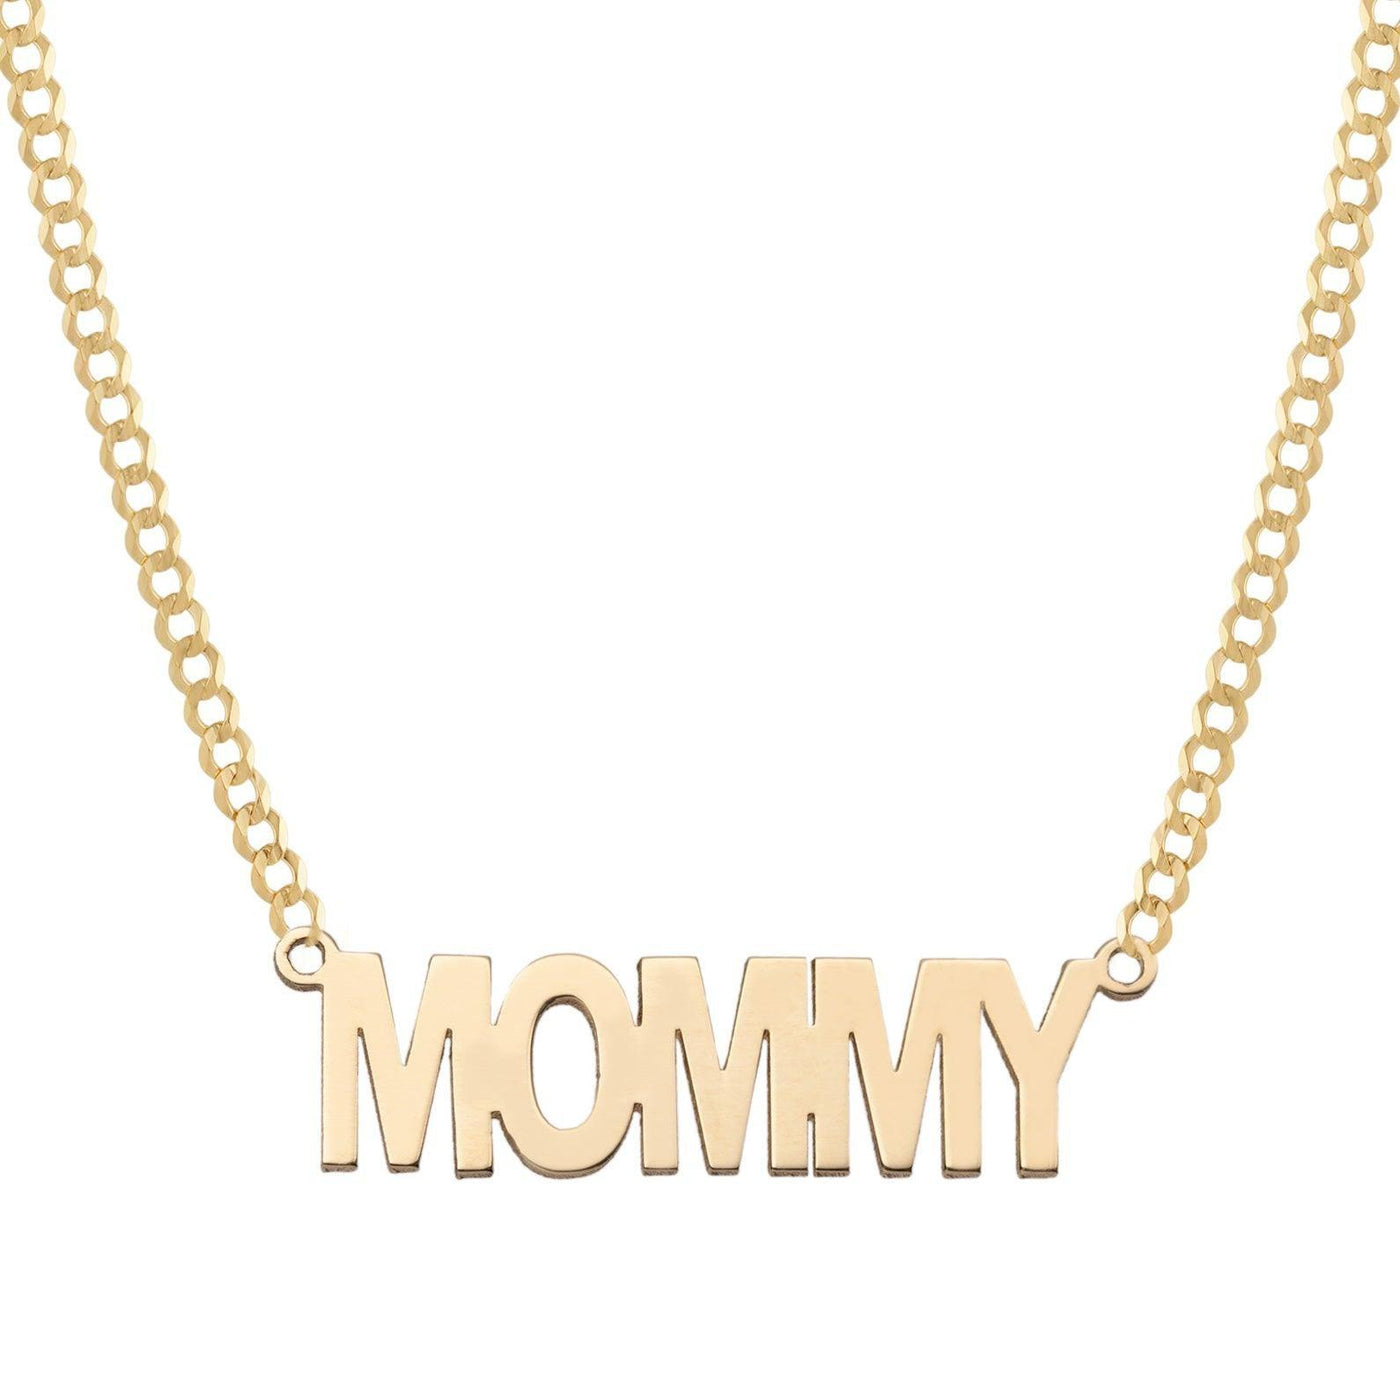 Ladies Script Name Plate Necklace 14K Gold - Style 102 - bayamjewelry